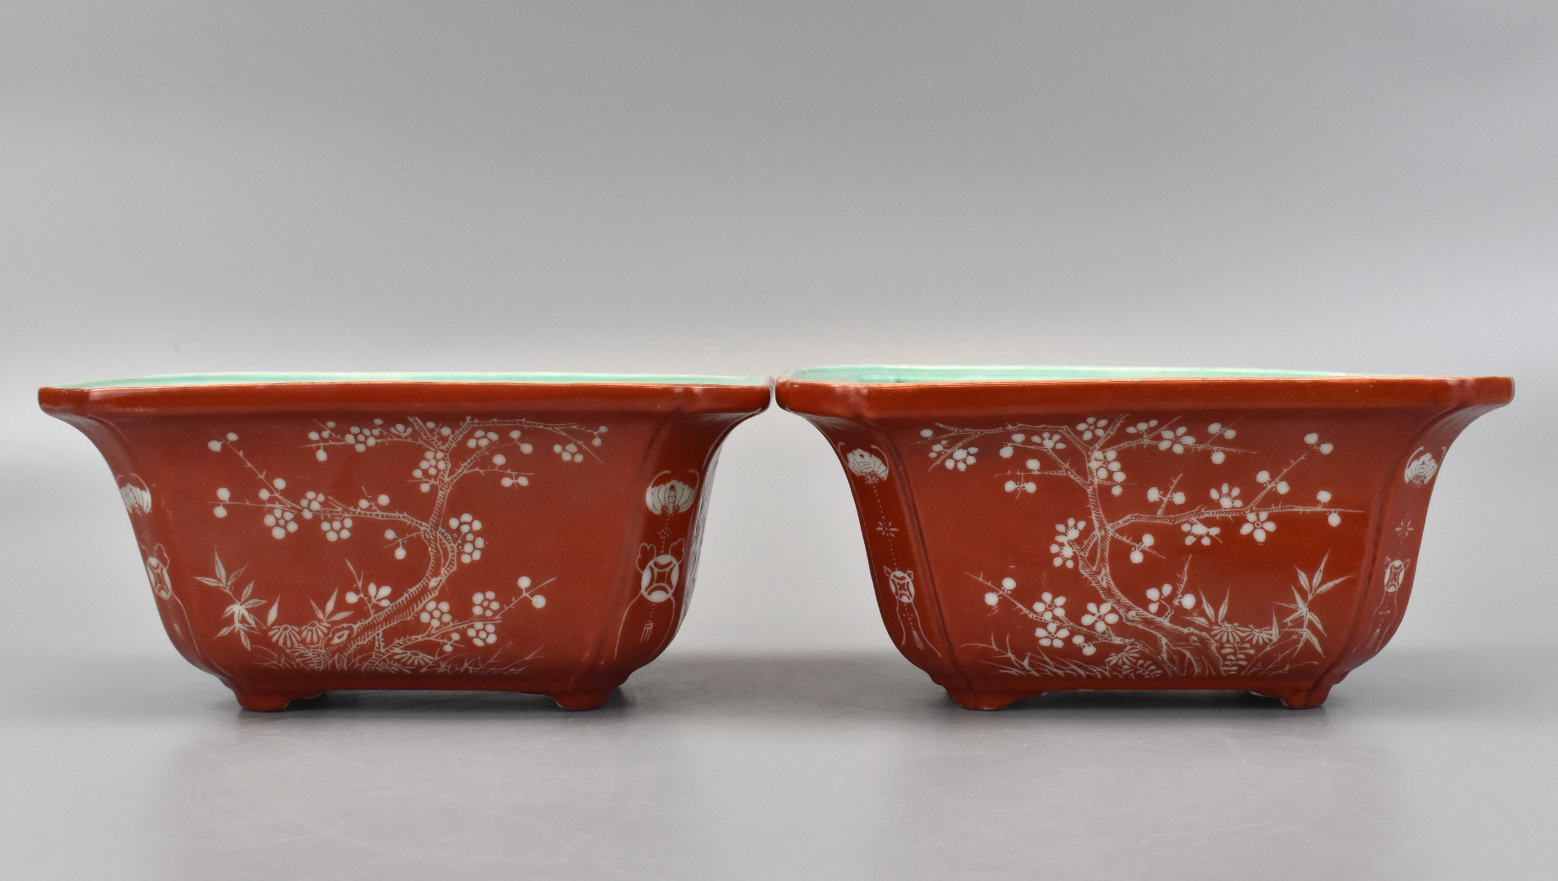 PAIR OF CHINESE CORAL RED PLANTER